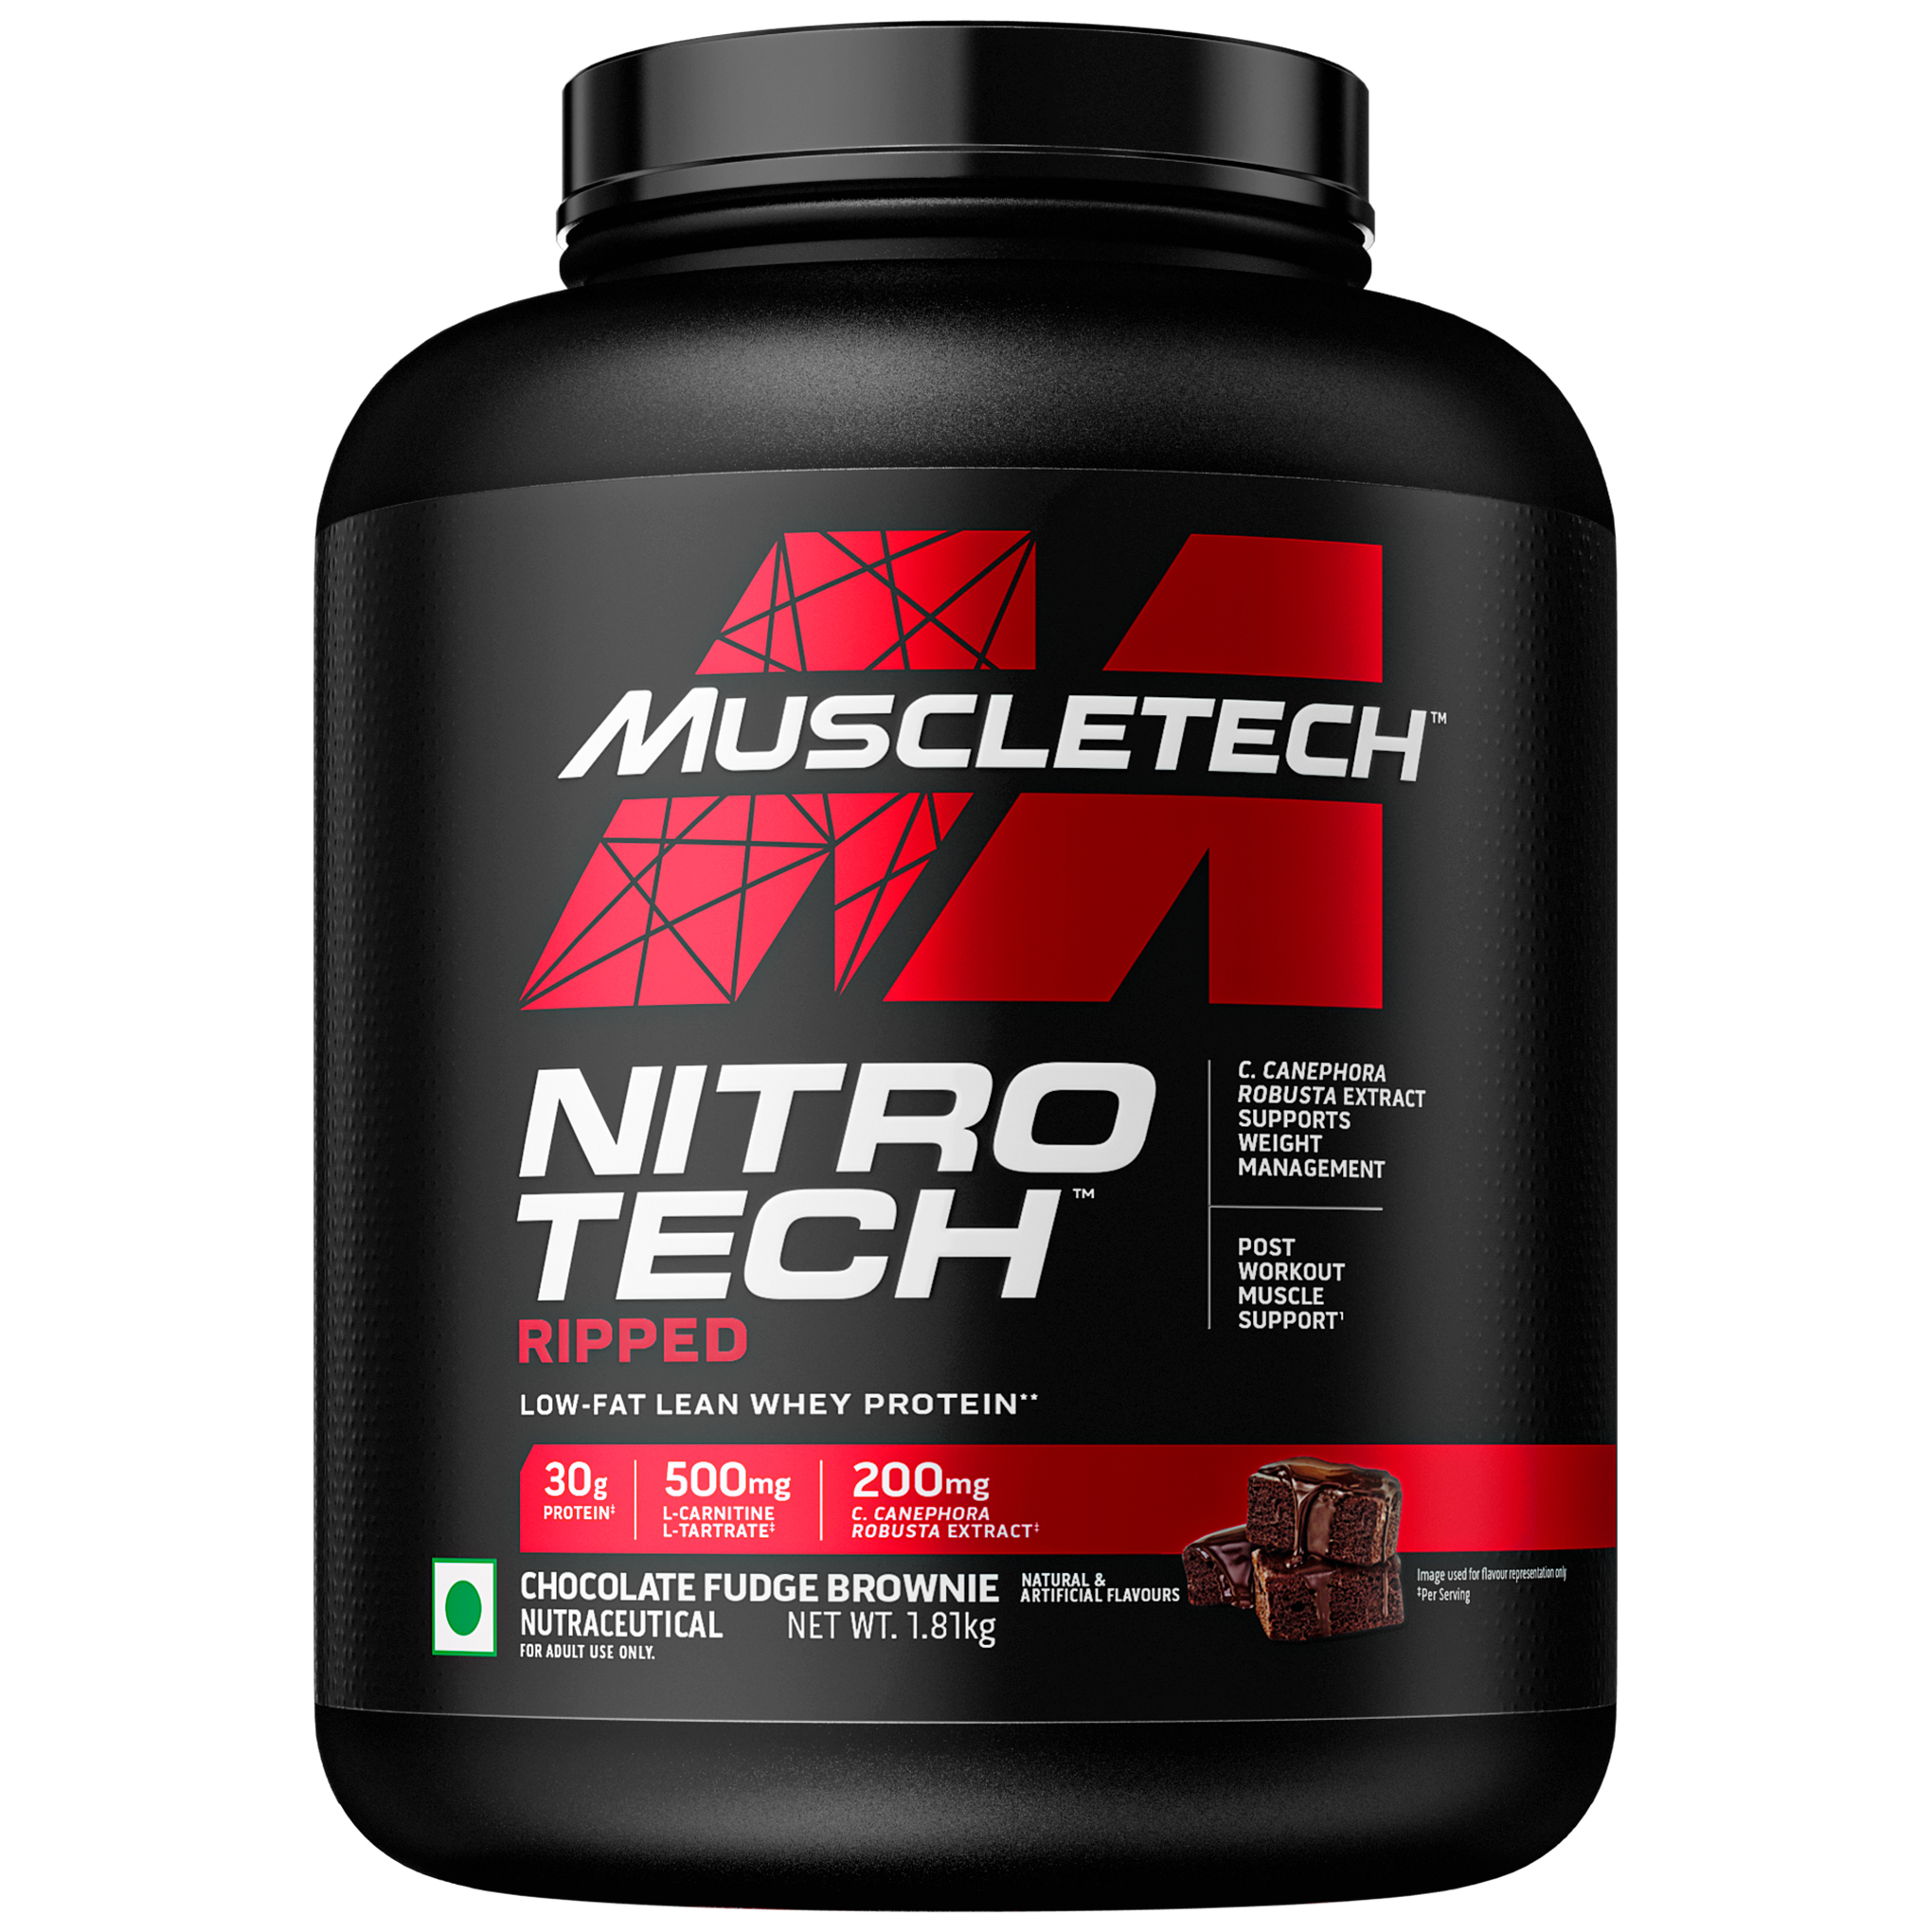 Muscletech Nitro Tech Ripped Protein With Weight loss Formula